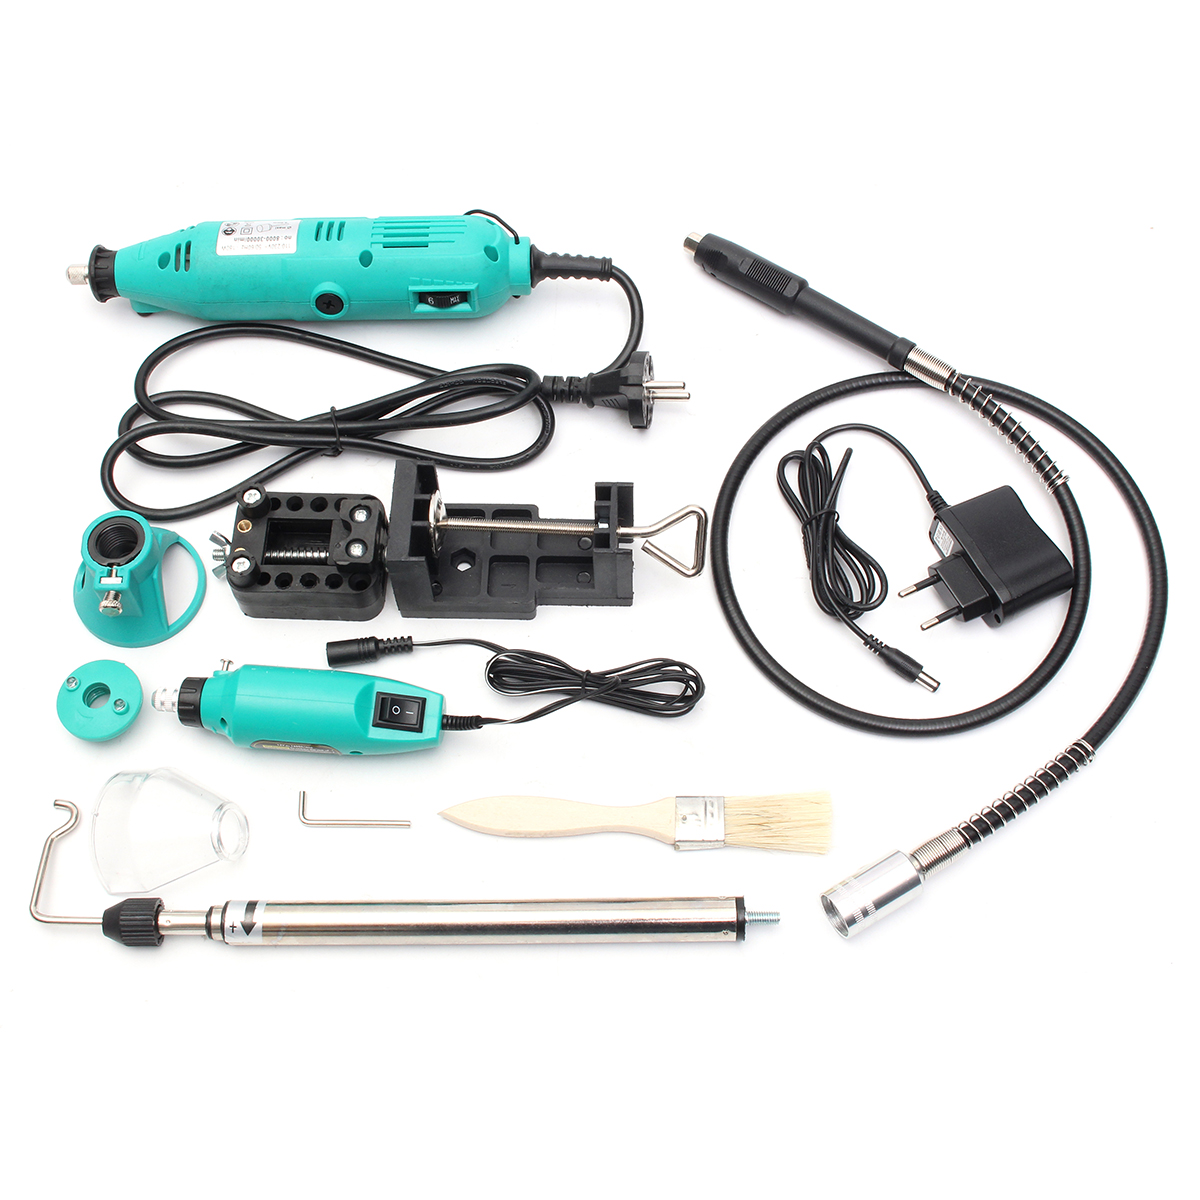 181Pcs-Mini-Drill-Electric-Grinder-Sanding-Polishing-Rotary-Tool-with-Accessory-Set-1299973-4